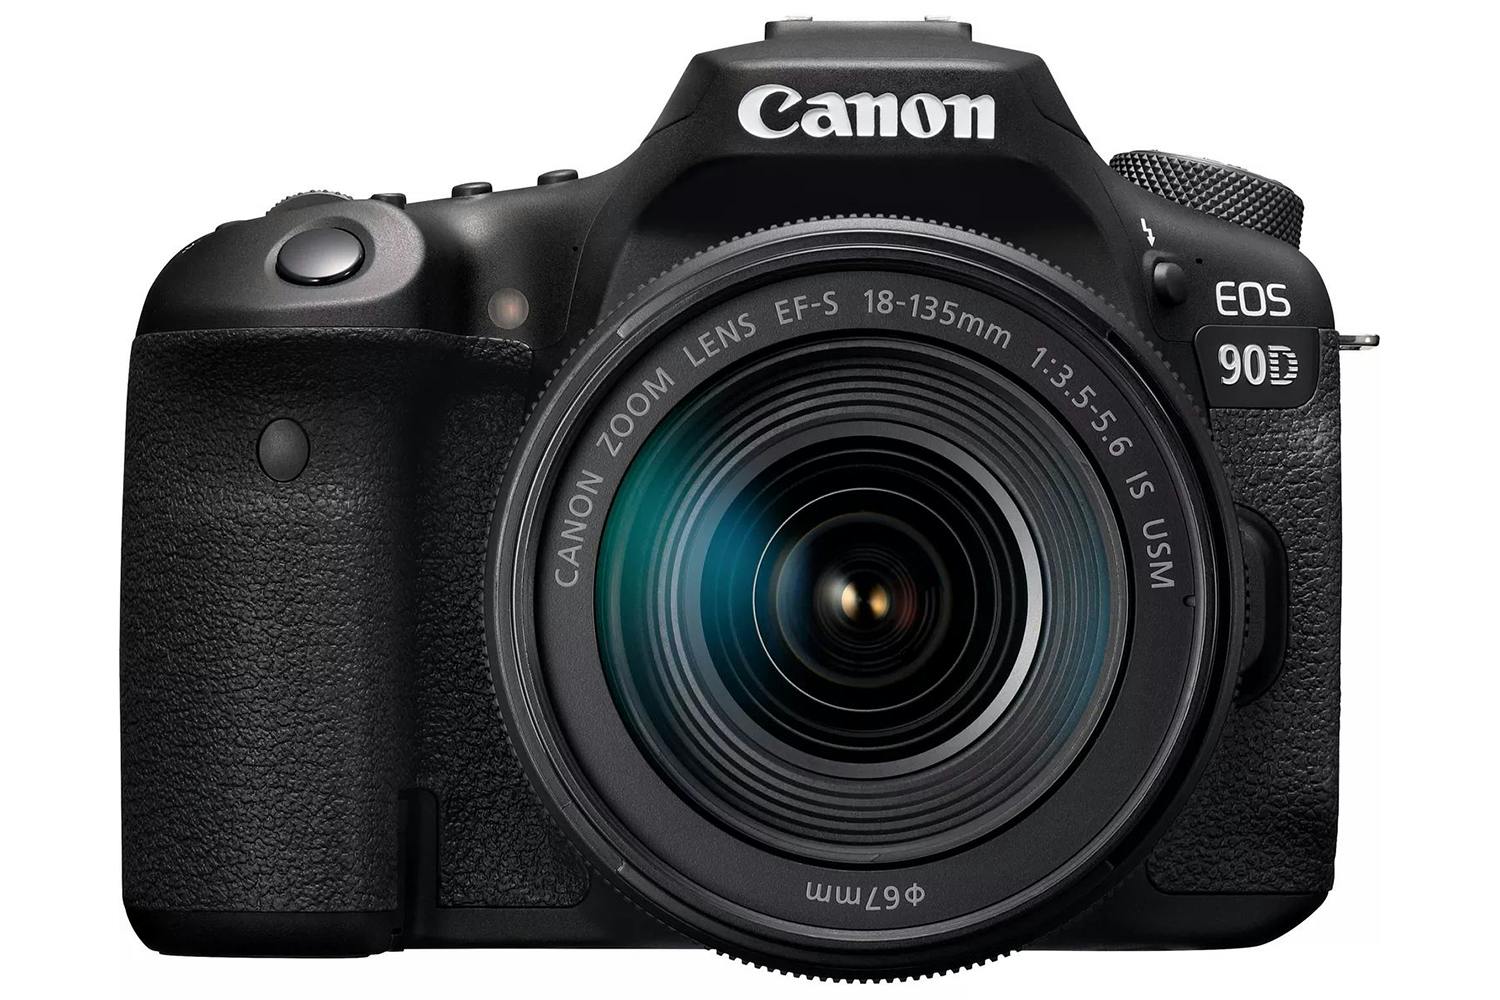 Canon EOS 90D and EF-S 18-135mm F/3.5-5.6 IS STM Lens